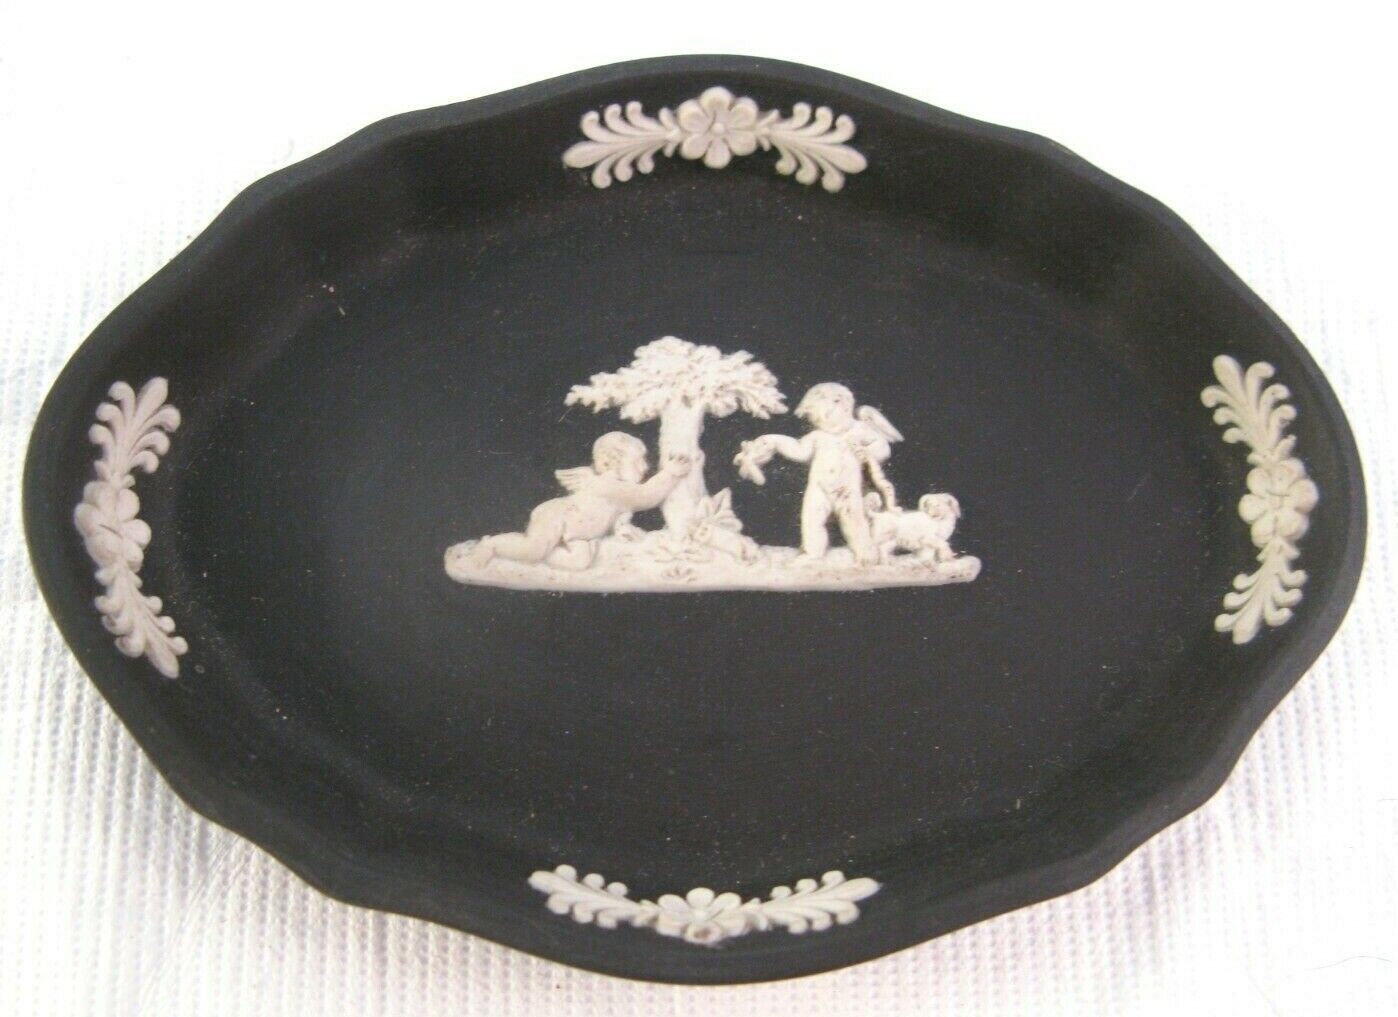 Wedgewood England Small Oval Plate Black with White Cherubs with Dog Looks New?